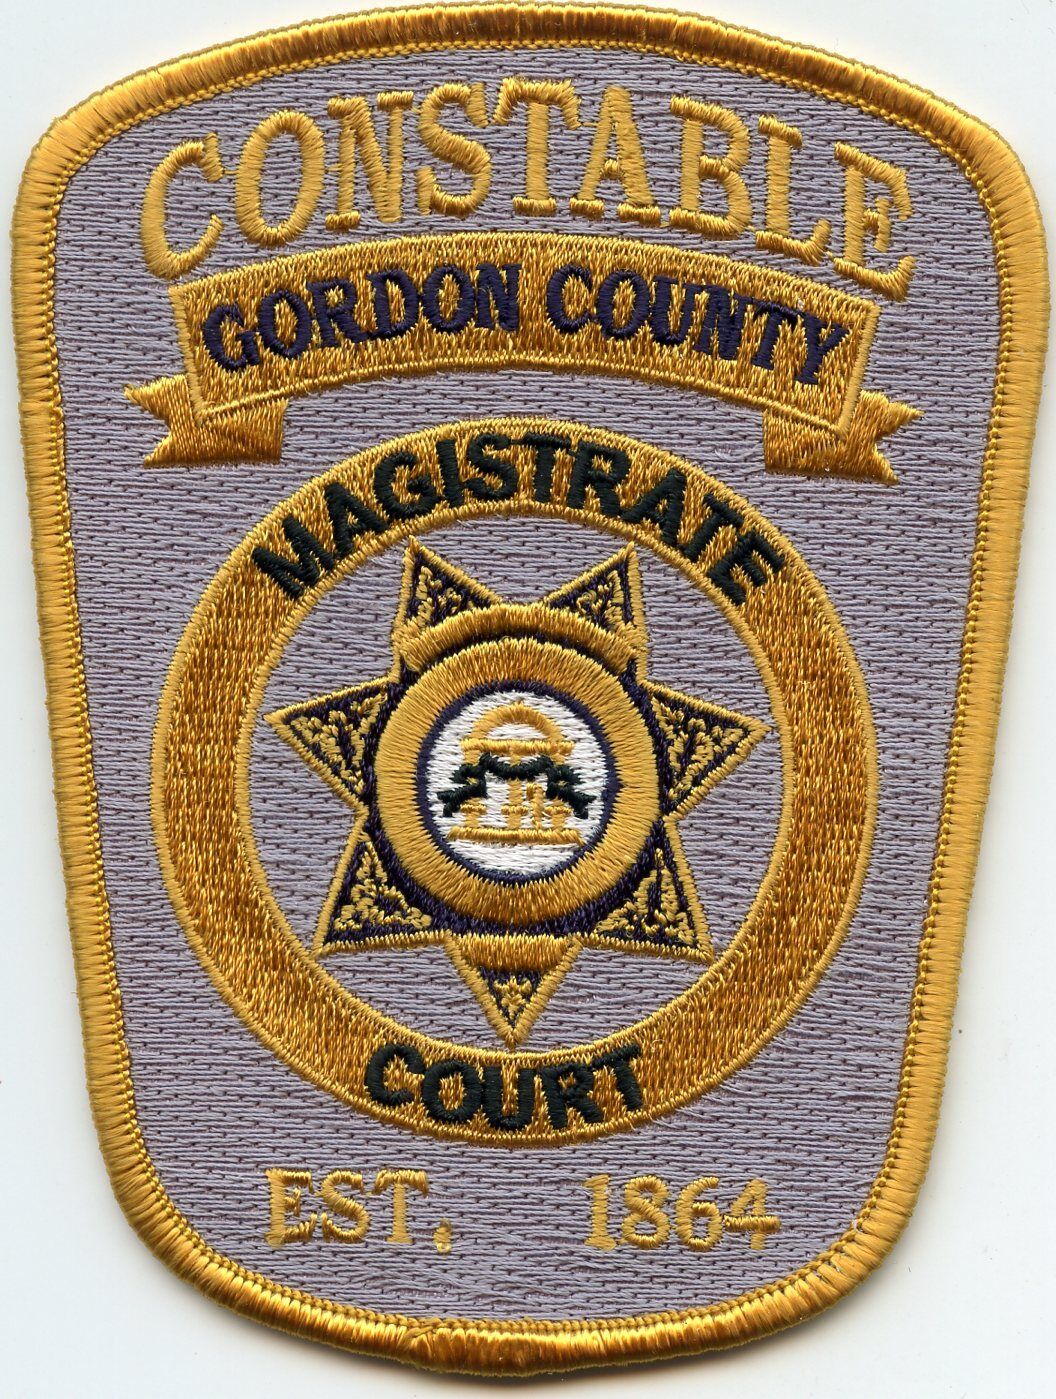 GORDON COUNTY GEORGIA GA MAGISTRATE COURT CONSTABLE sheriff police PATCH